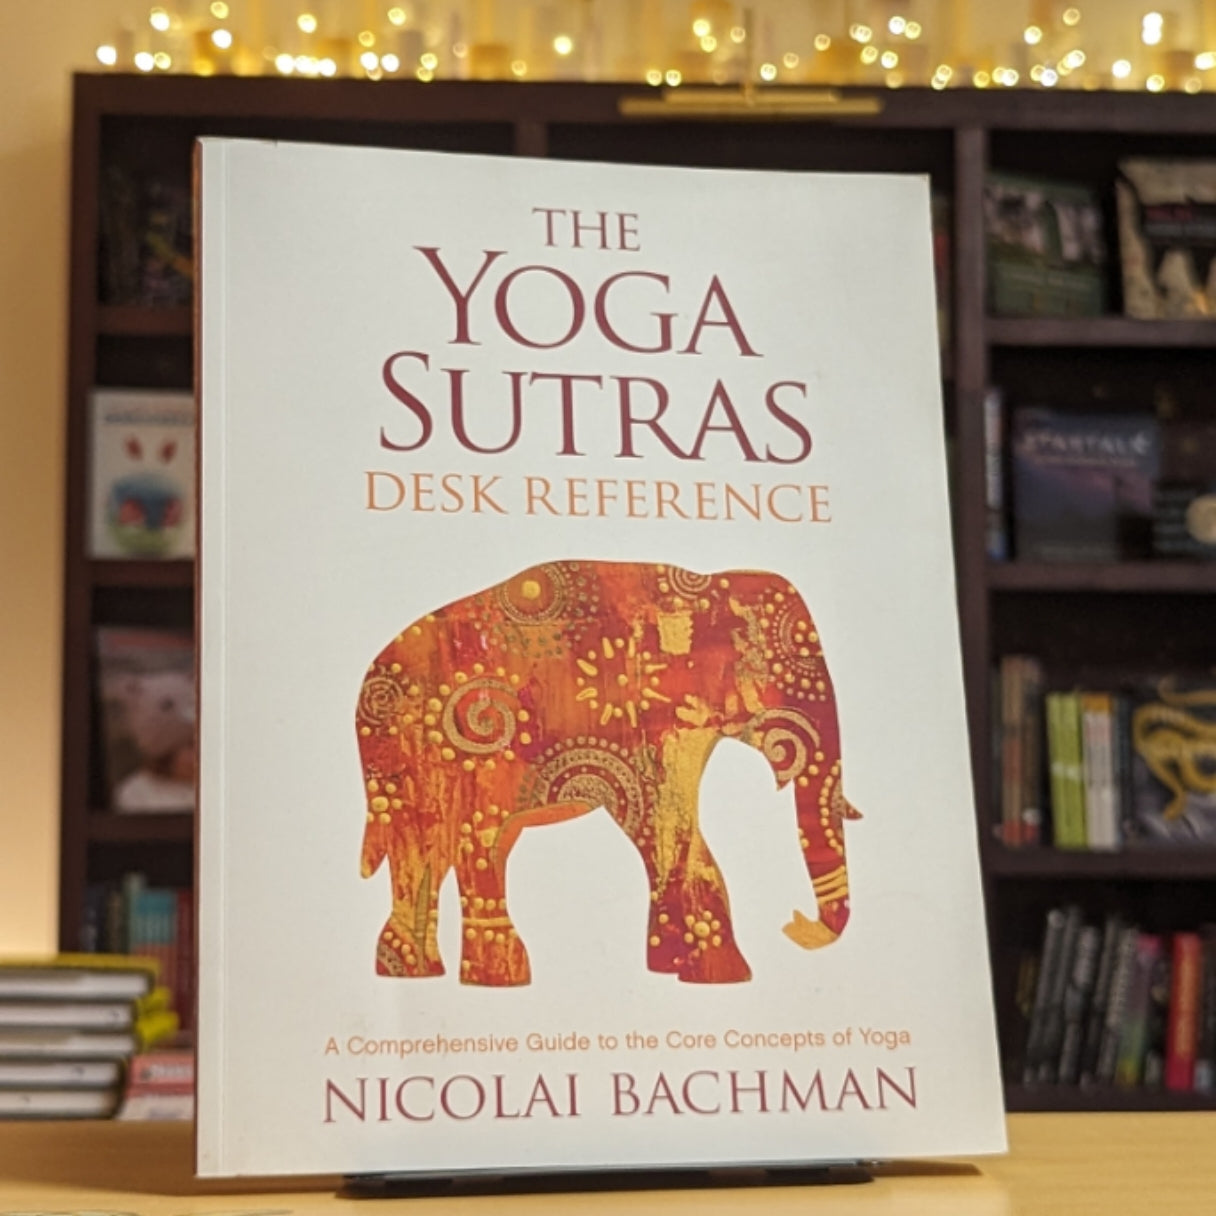 The Yoga Sutras Desk Reference: A Comprehensive Guide to the Core Concepts of Yoga